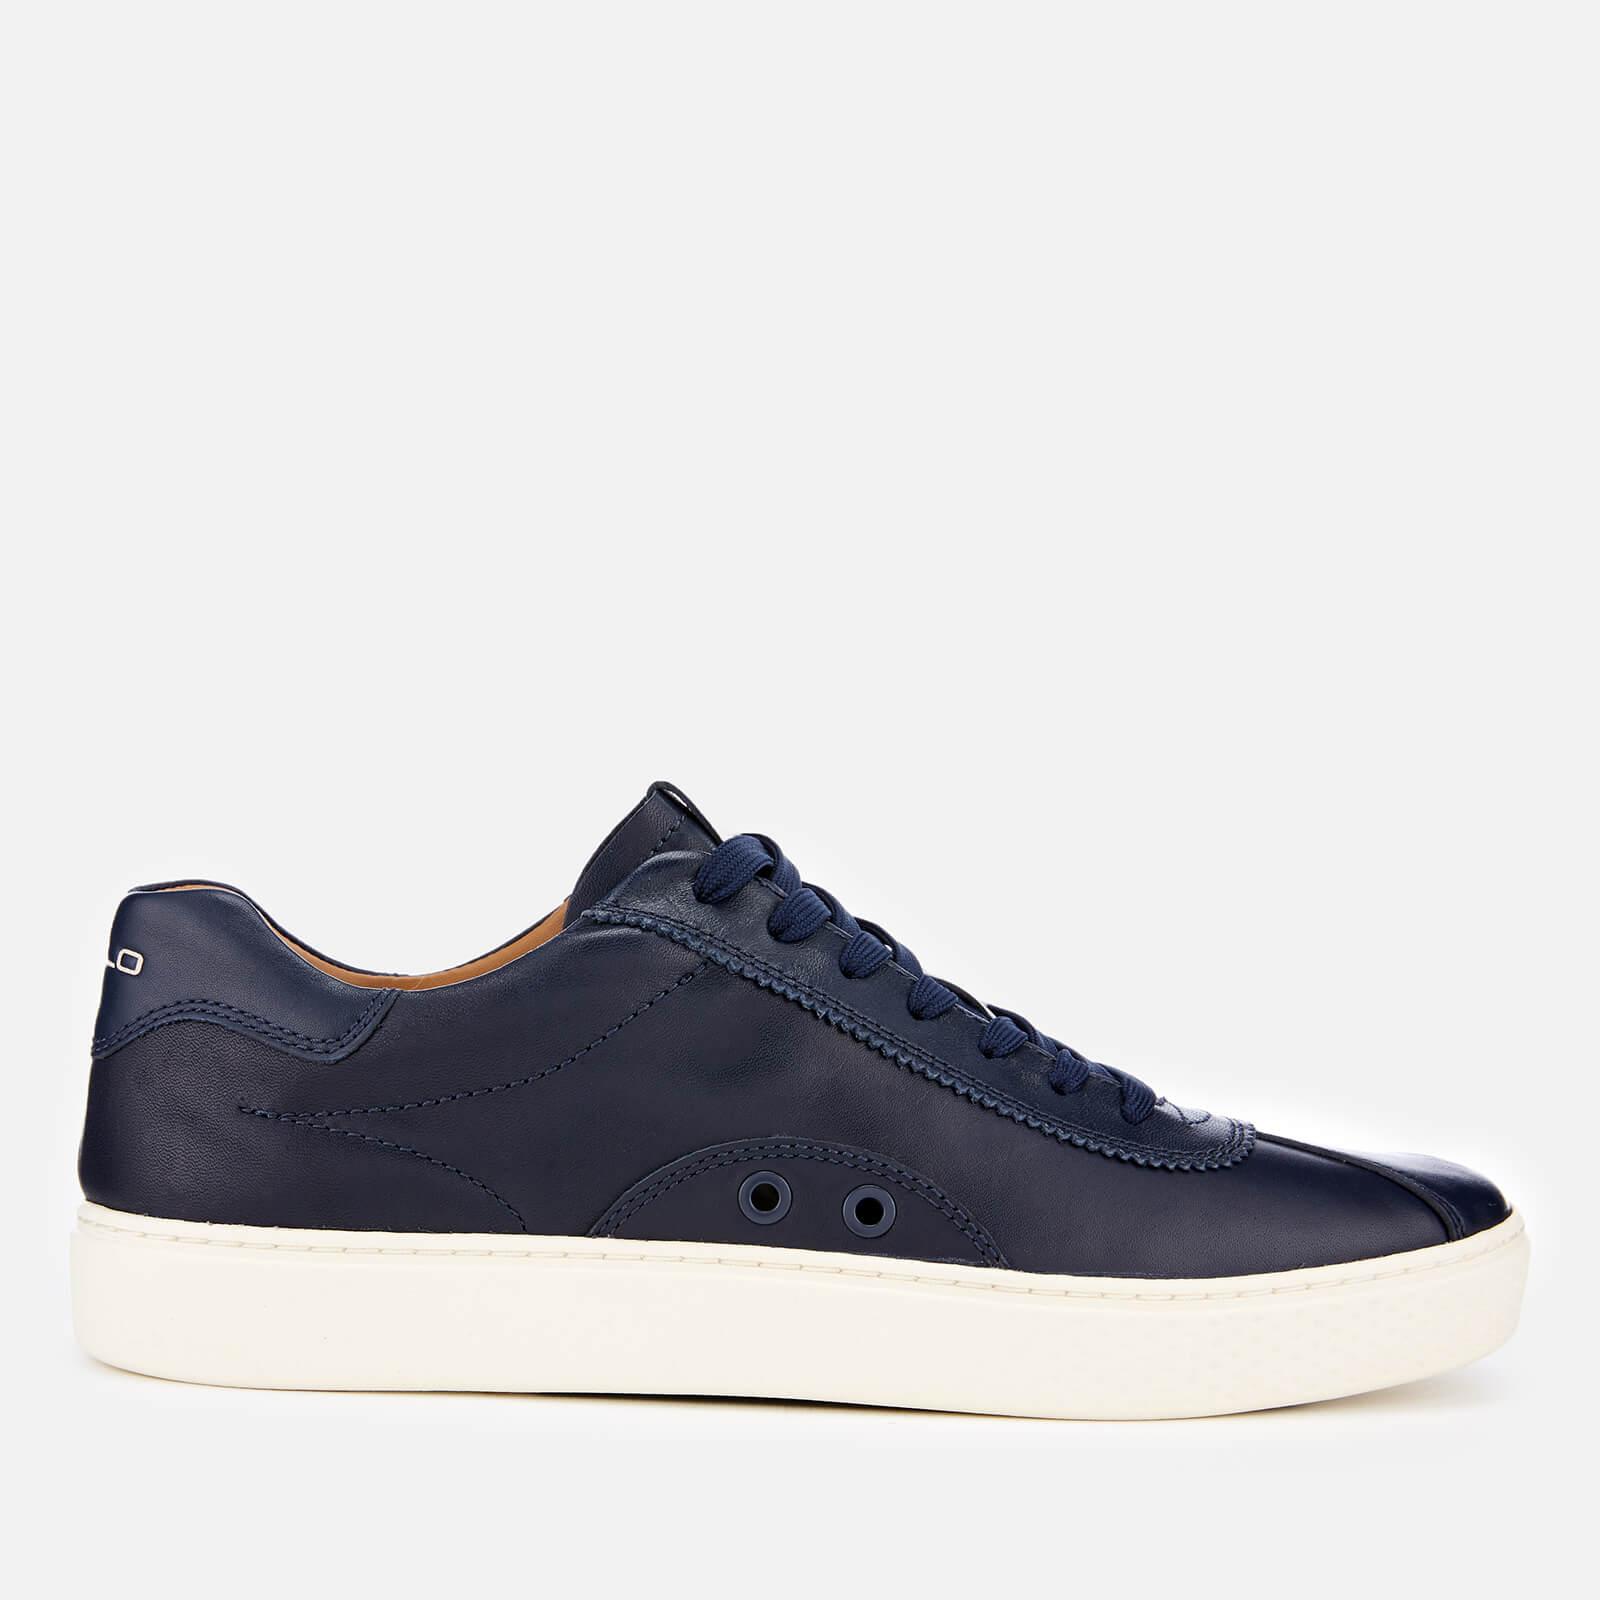 Polo Ralph Lauren Court 100 Leather Trainers in Navy (Blue) for Men - Lyst